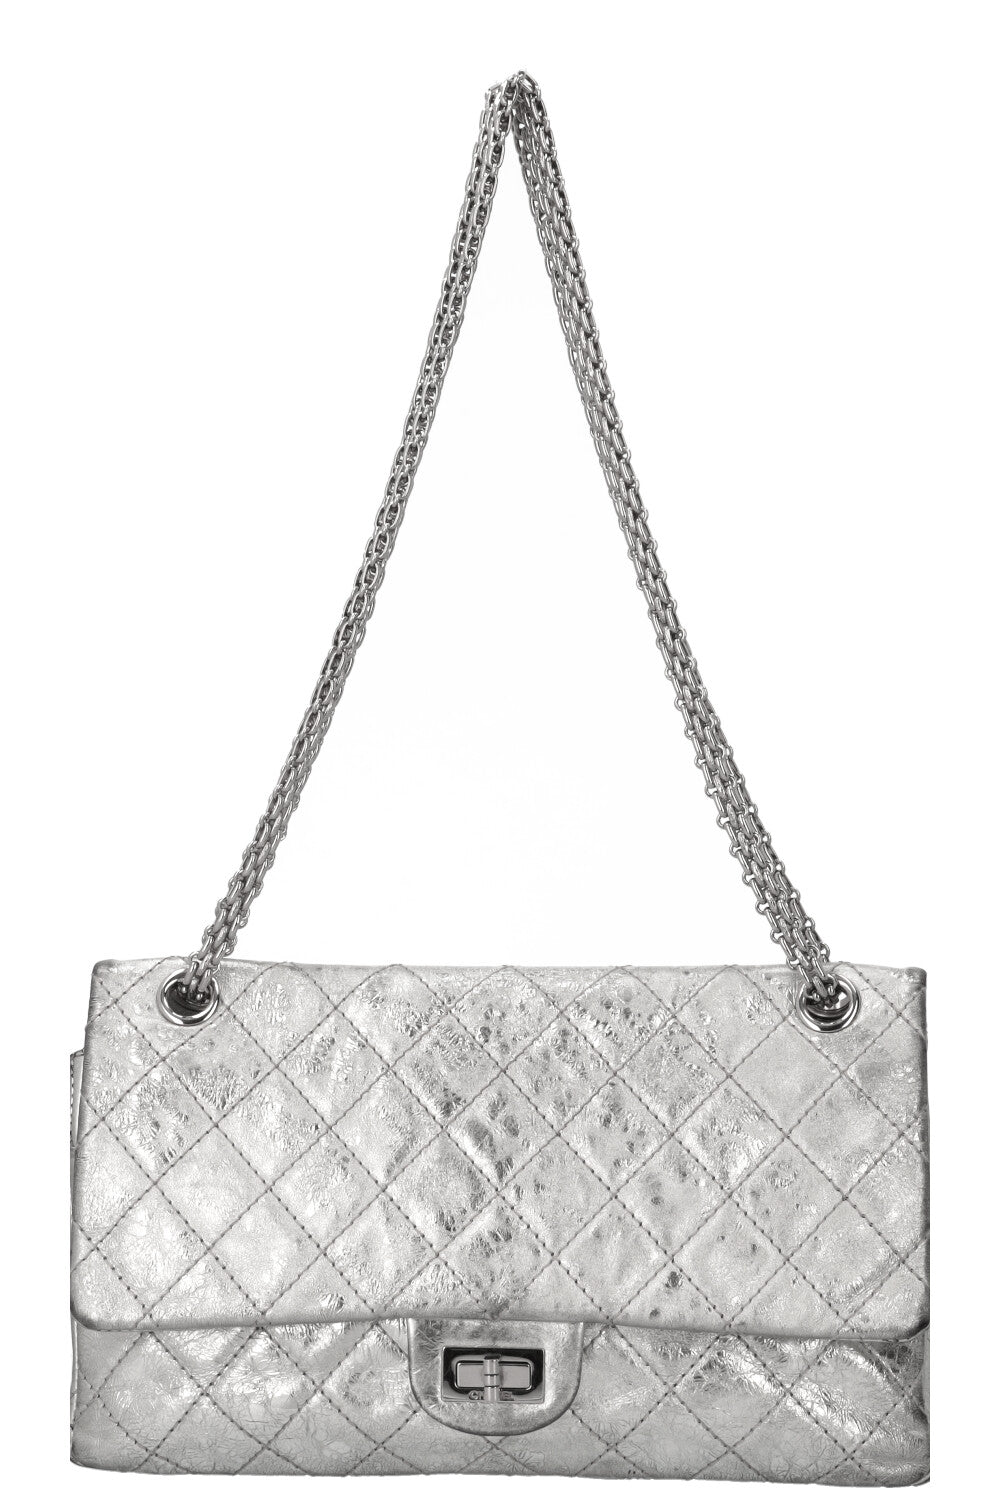 CHANEL 2.55 Double Flap Bag Silver